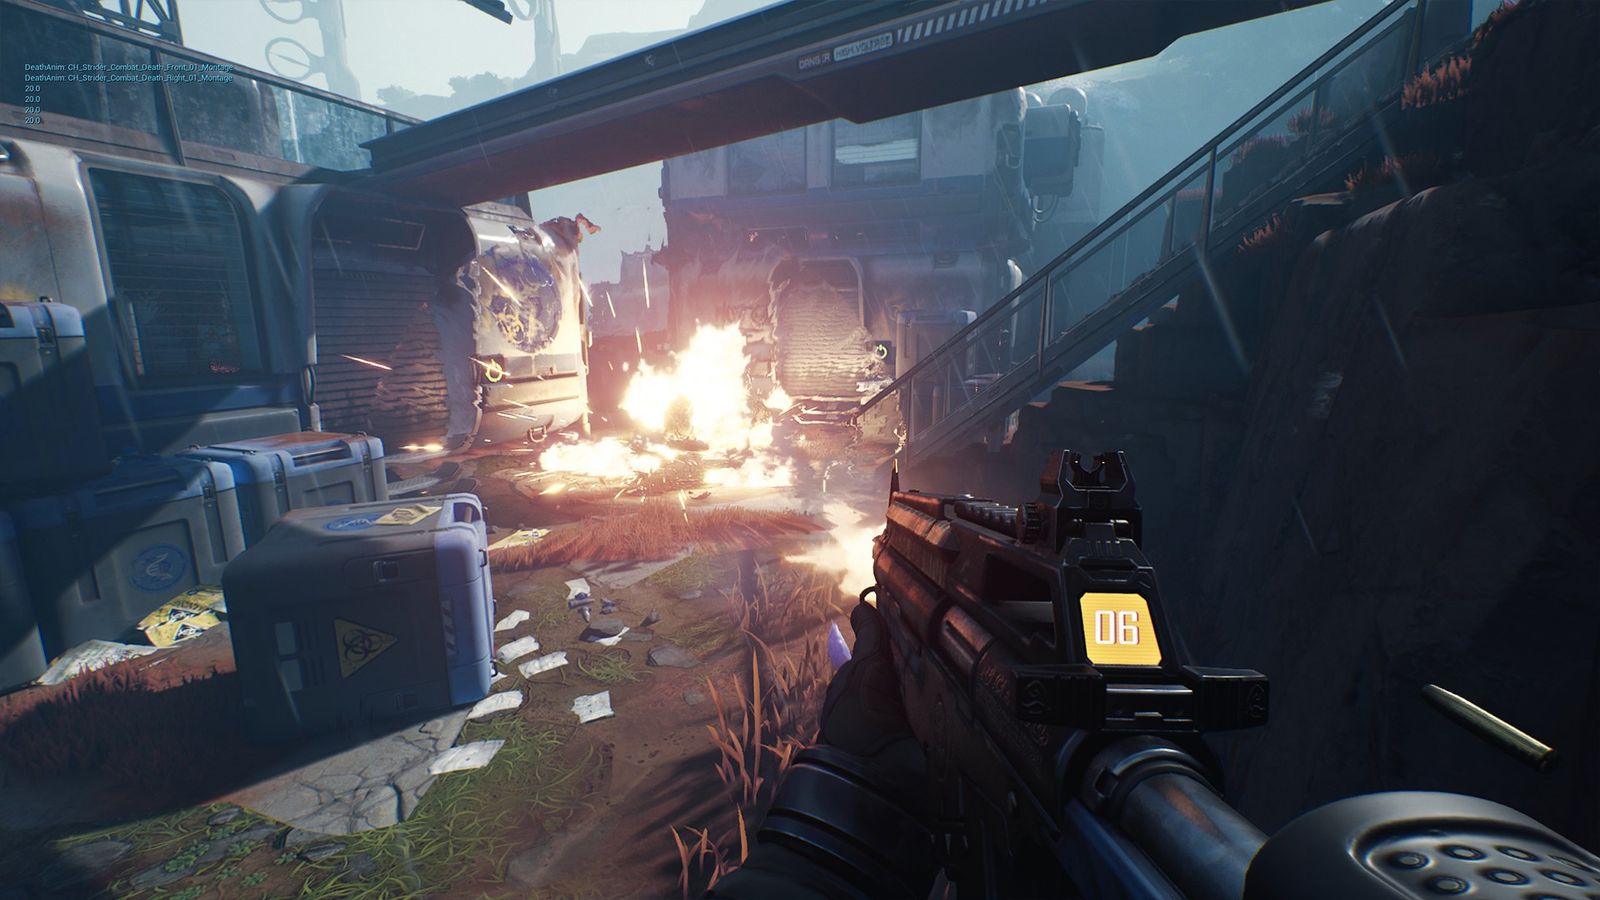 Image of the player shooting a futuristic weapon in The Cycle.